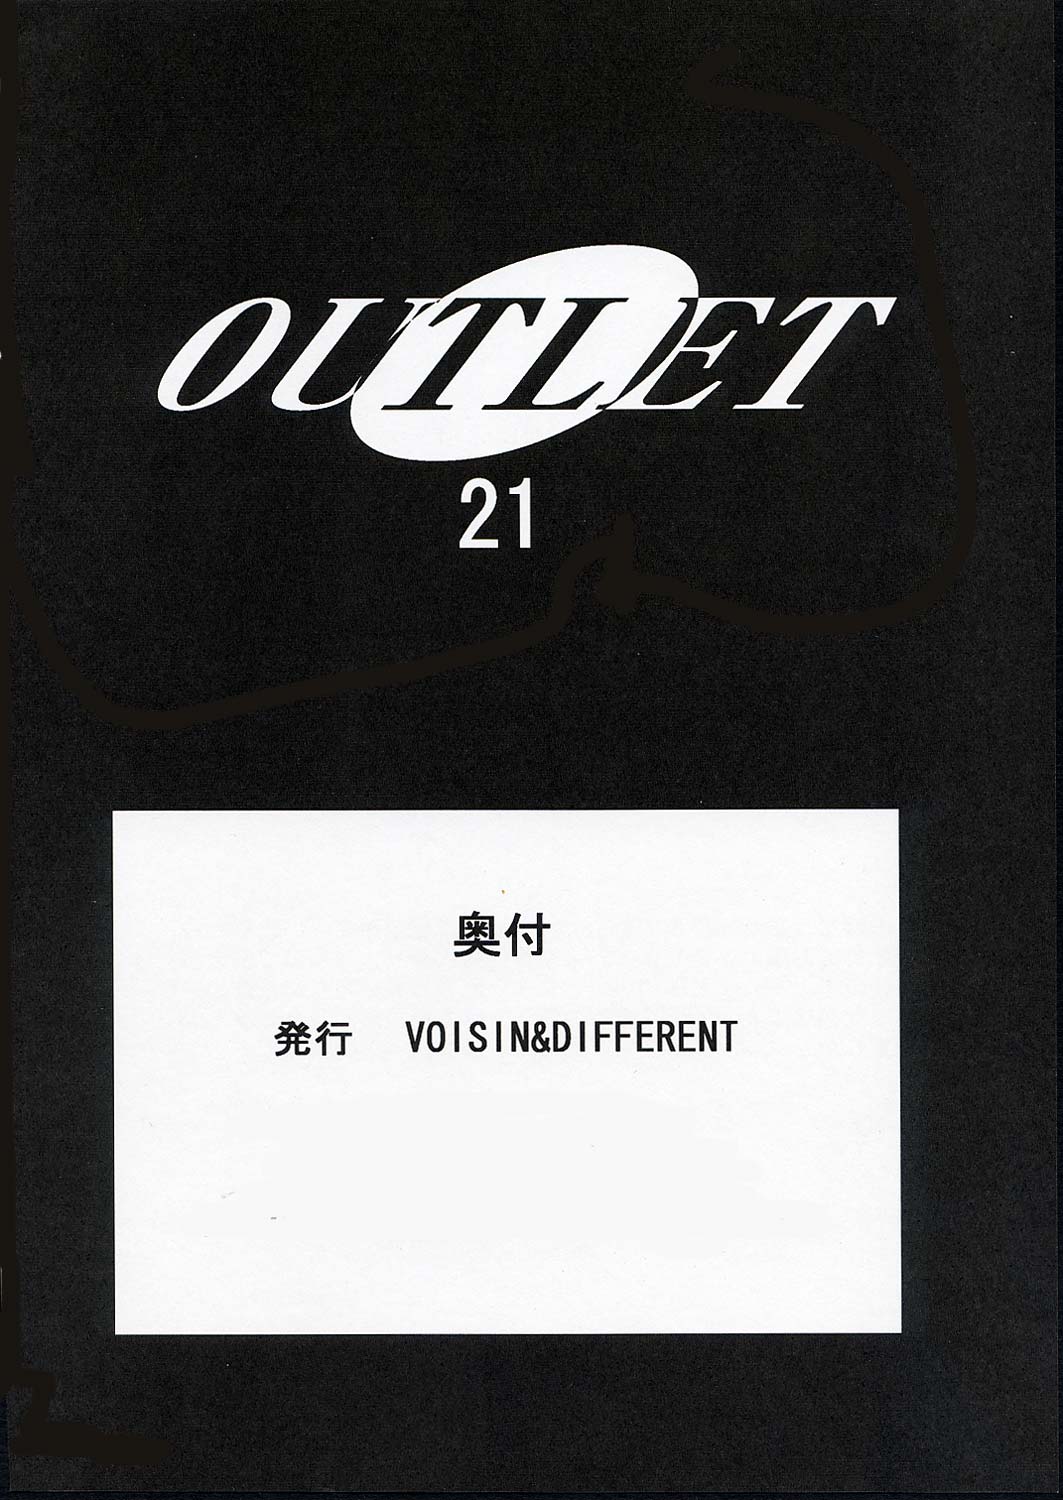 (C67) [ST. DIFFERENT] OUT LET 21 (スクールランブル)